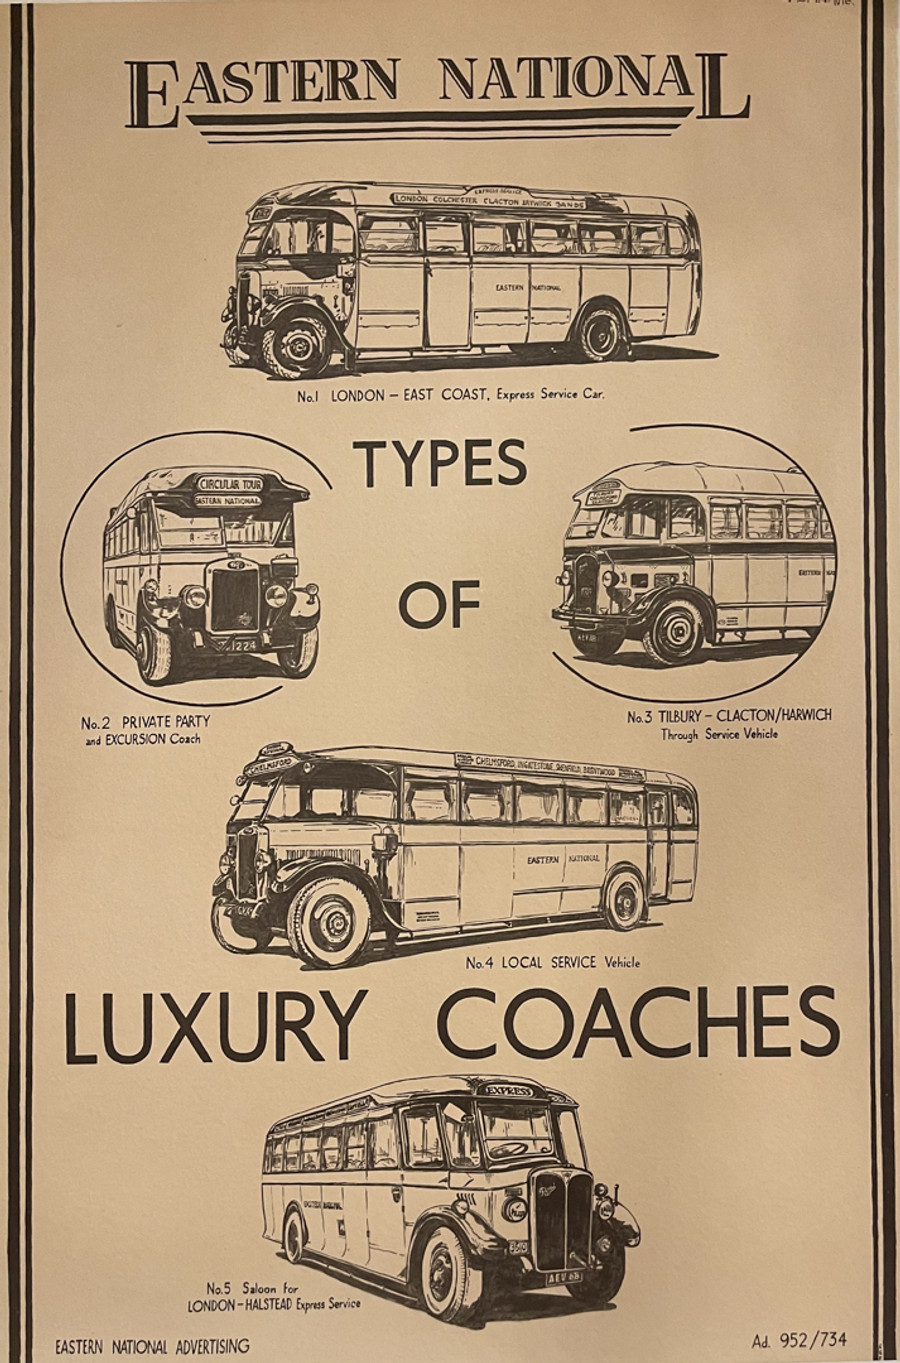 Eastern National Transportation coach original British travel campaign poster printed circa 1954. A condition. Mounted on archival linen and ready for framing.